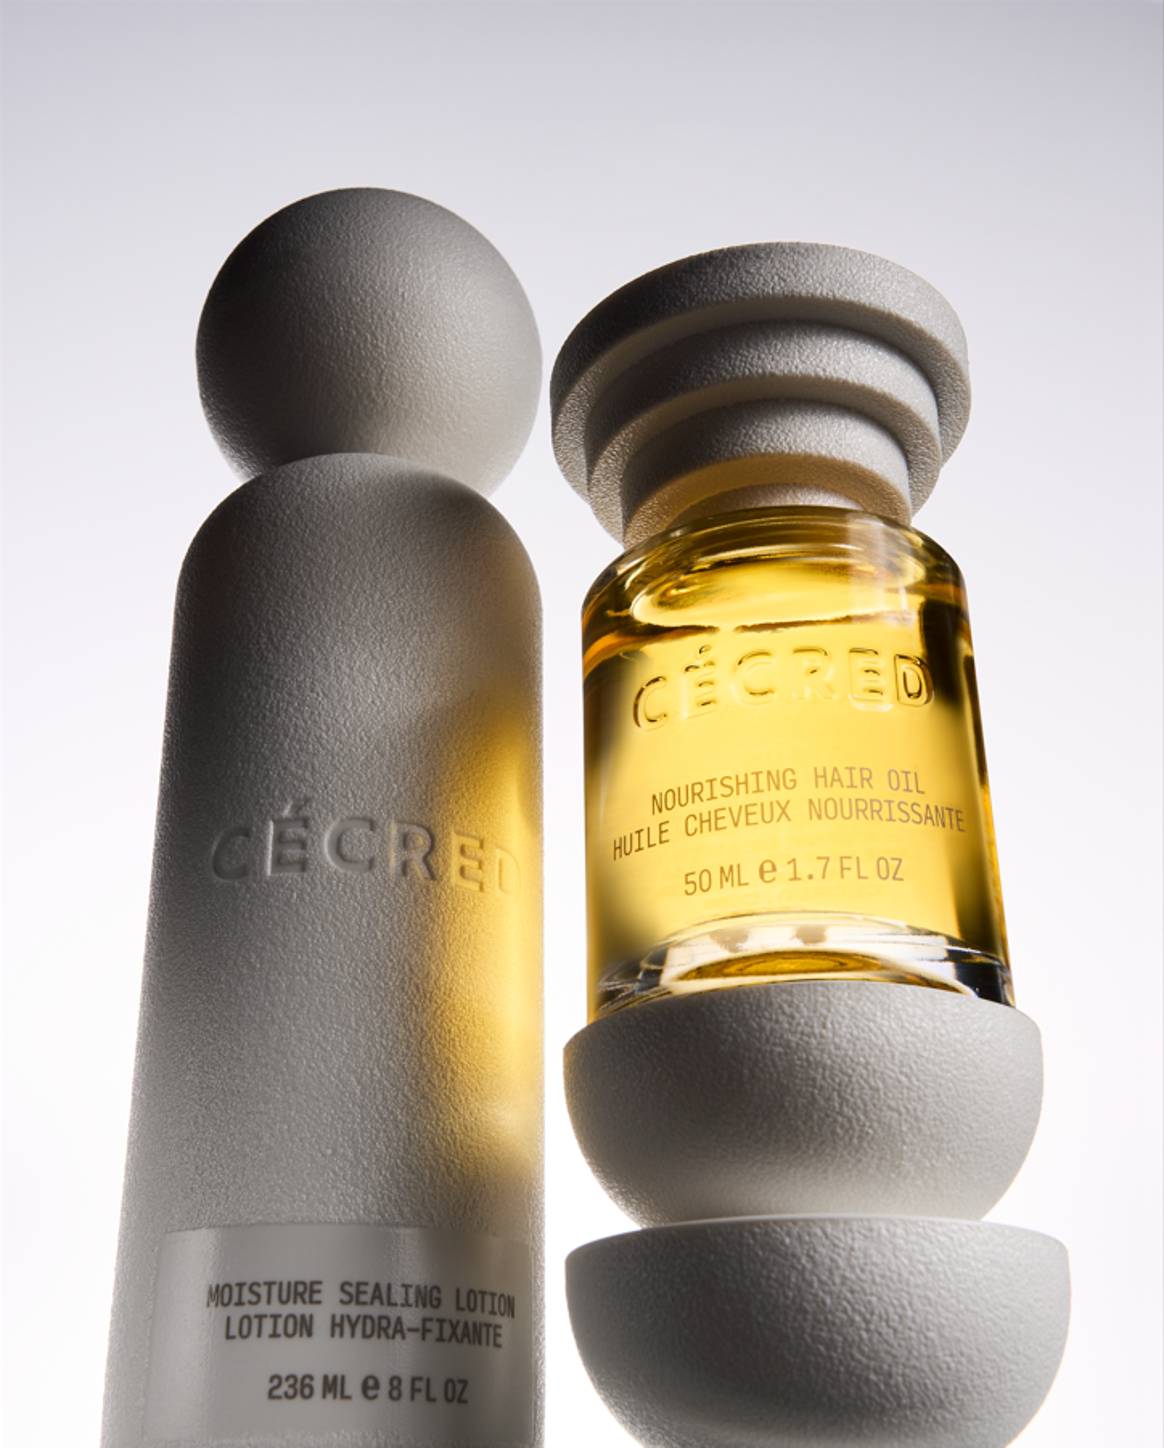 Inside the technology of Beyoncé's new haircare brand Cécred